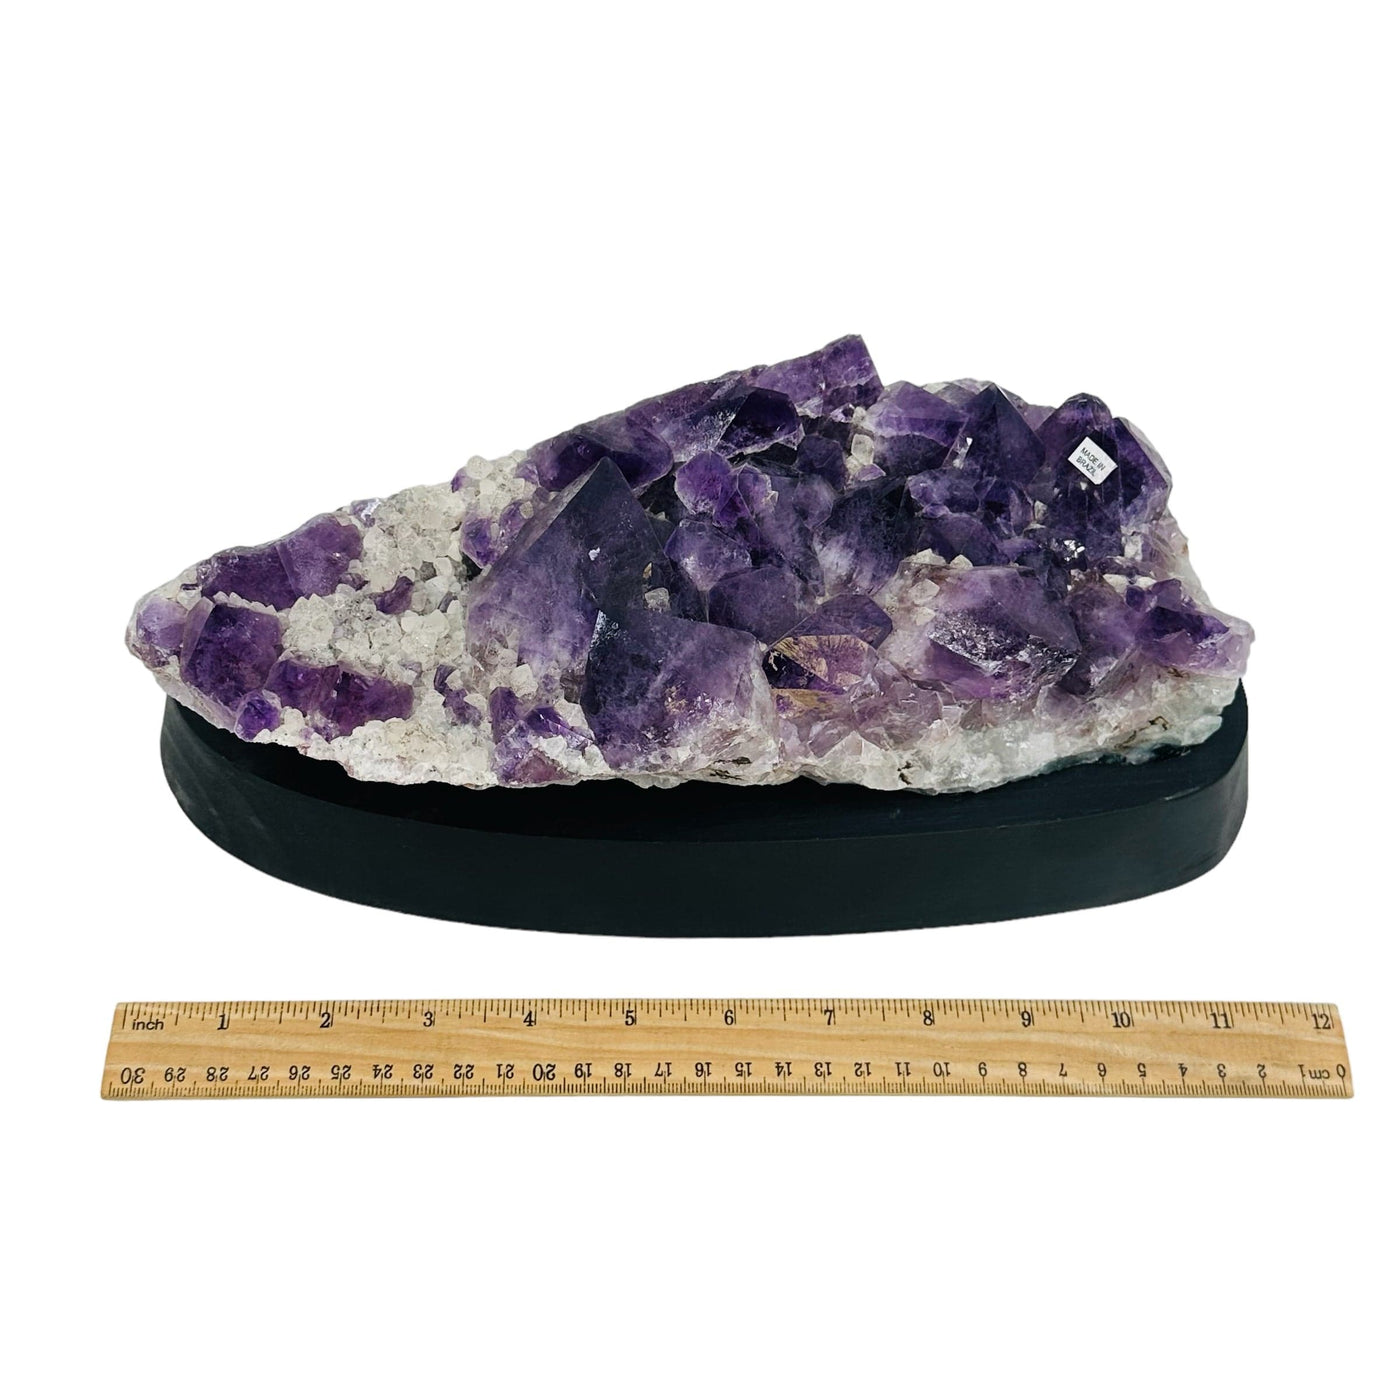 Amethyst Crystal Cluster on Wooden Base - Crystal Decor - next to a ruler for size reference 